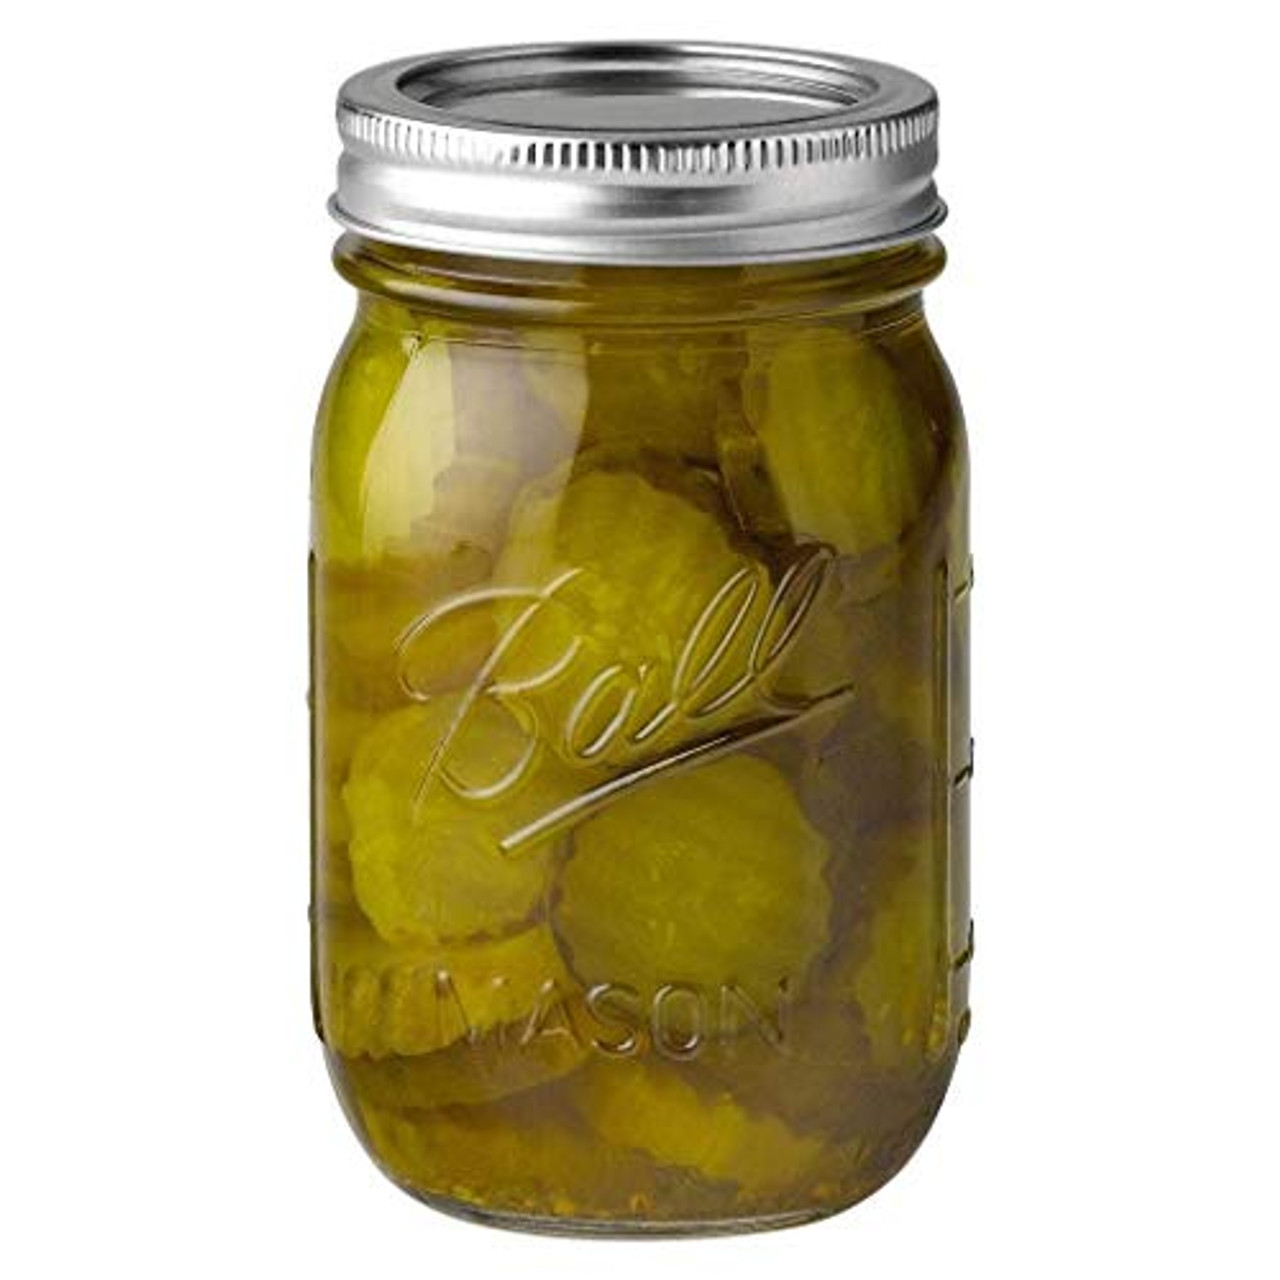  Regular Mouth Mason Jars 16 oz - (4 Pack) - Ball Regular Mouth  Pint 16-Ounces Mason Jars With Airtight lids and Bands - For Canning,  Fermenting, Pickling, Freezing, Storage + M.E.M